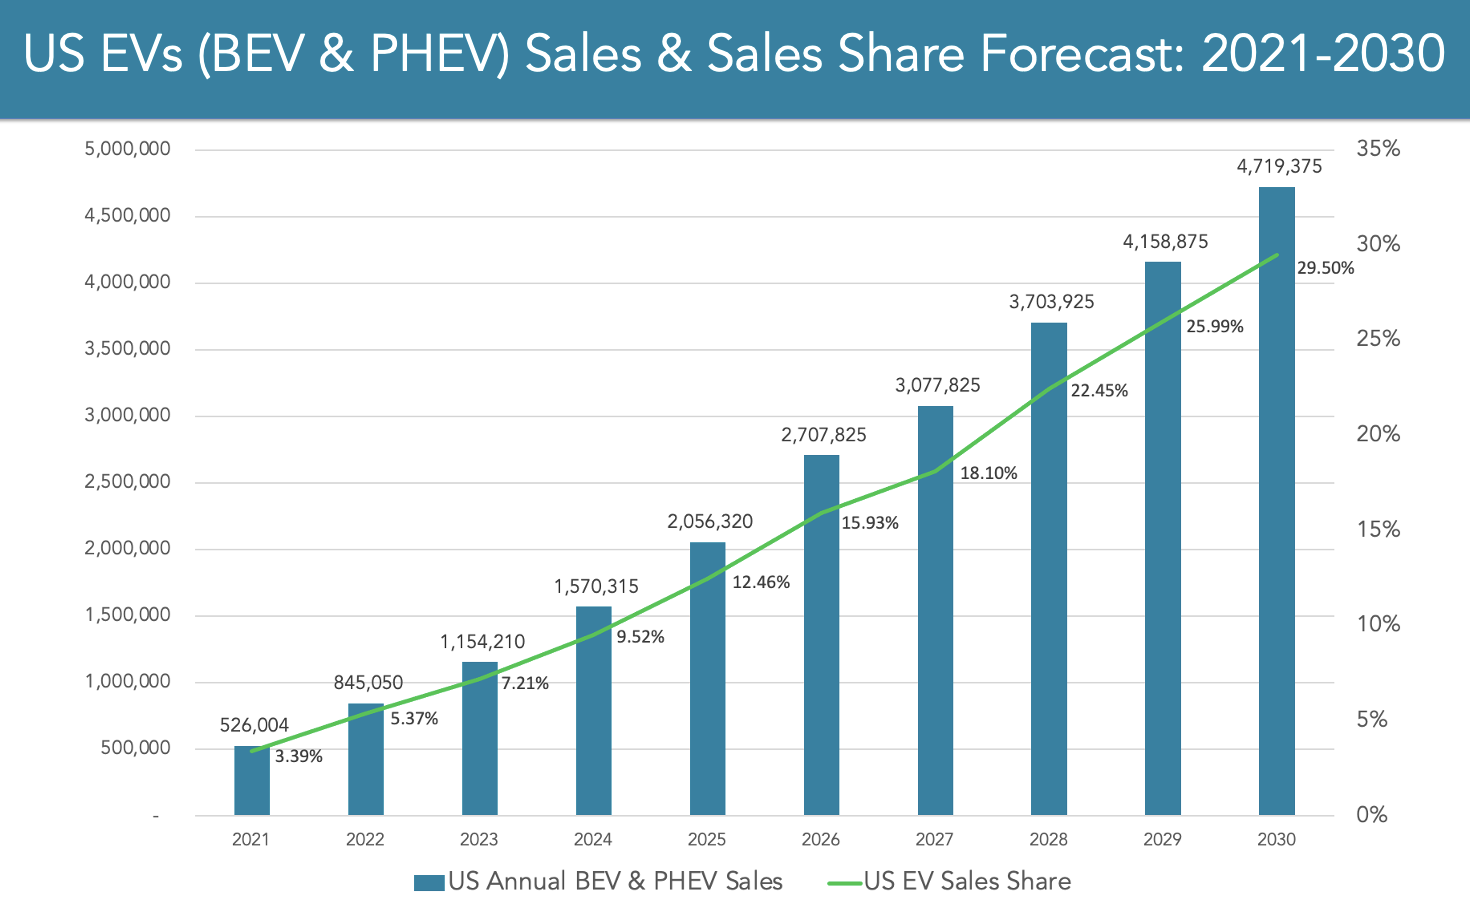 Image 1: The long-term forecast for EV sales in the United States, with nearly 30% of car sales coming from EV sales in 2030, according to EVAdoption.